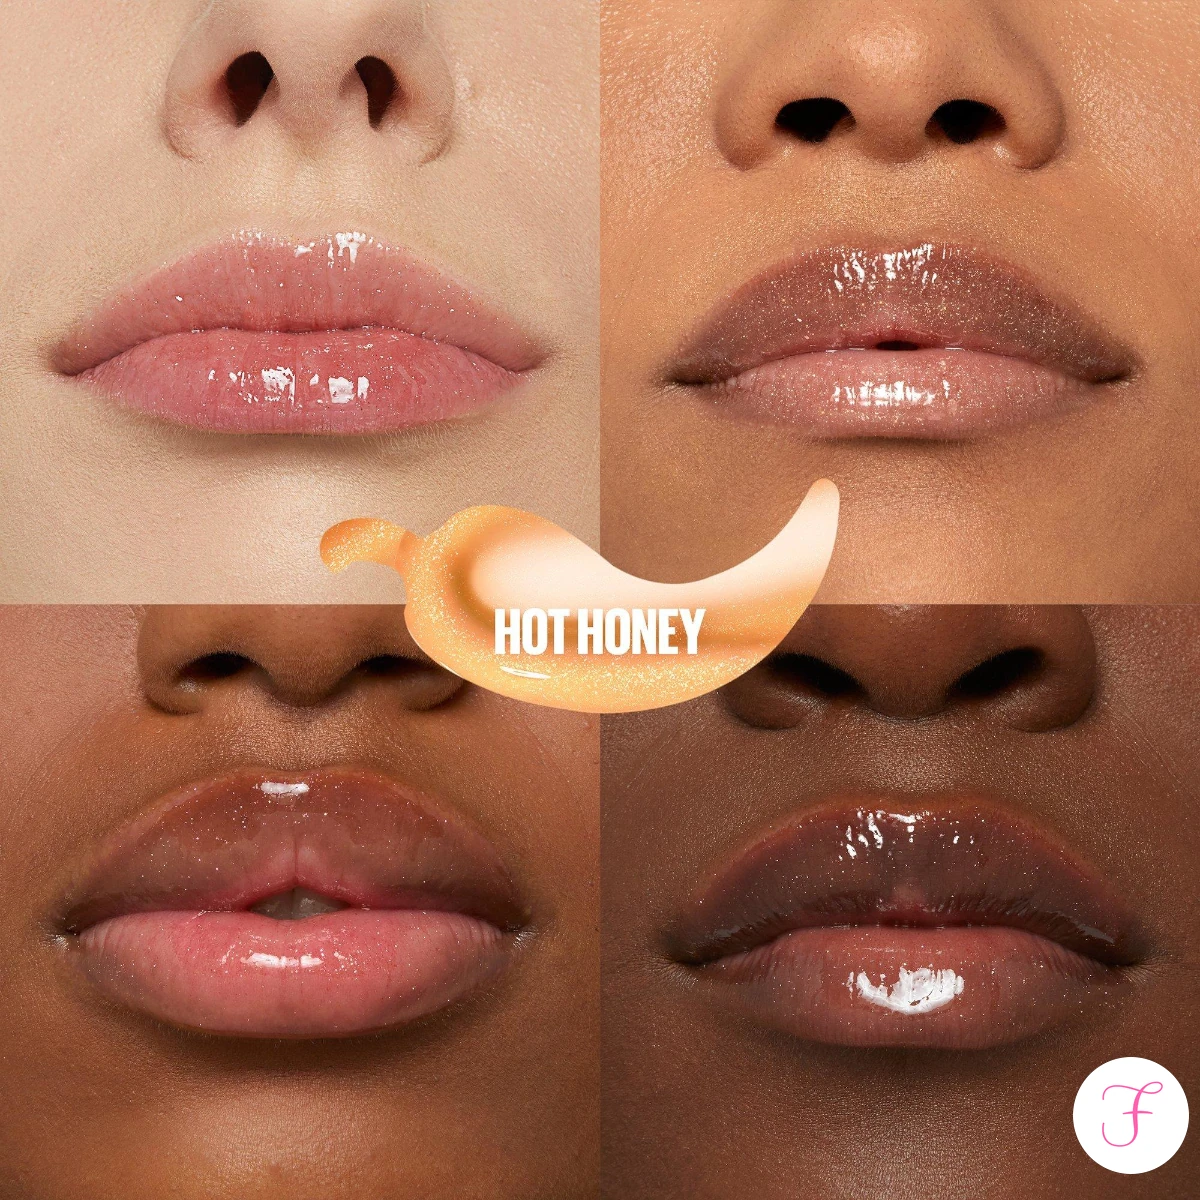 maybelline-Lifter-Plump-hot-honey-swatches